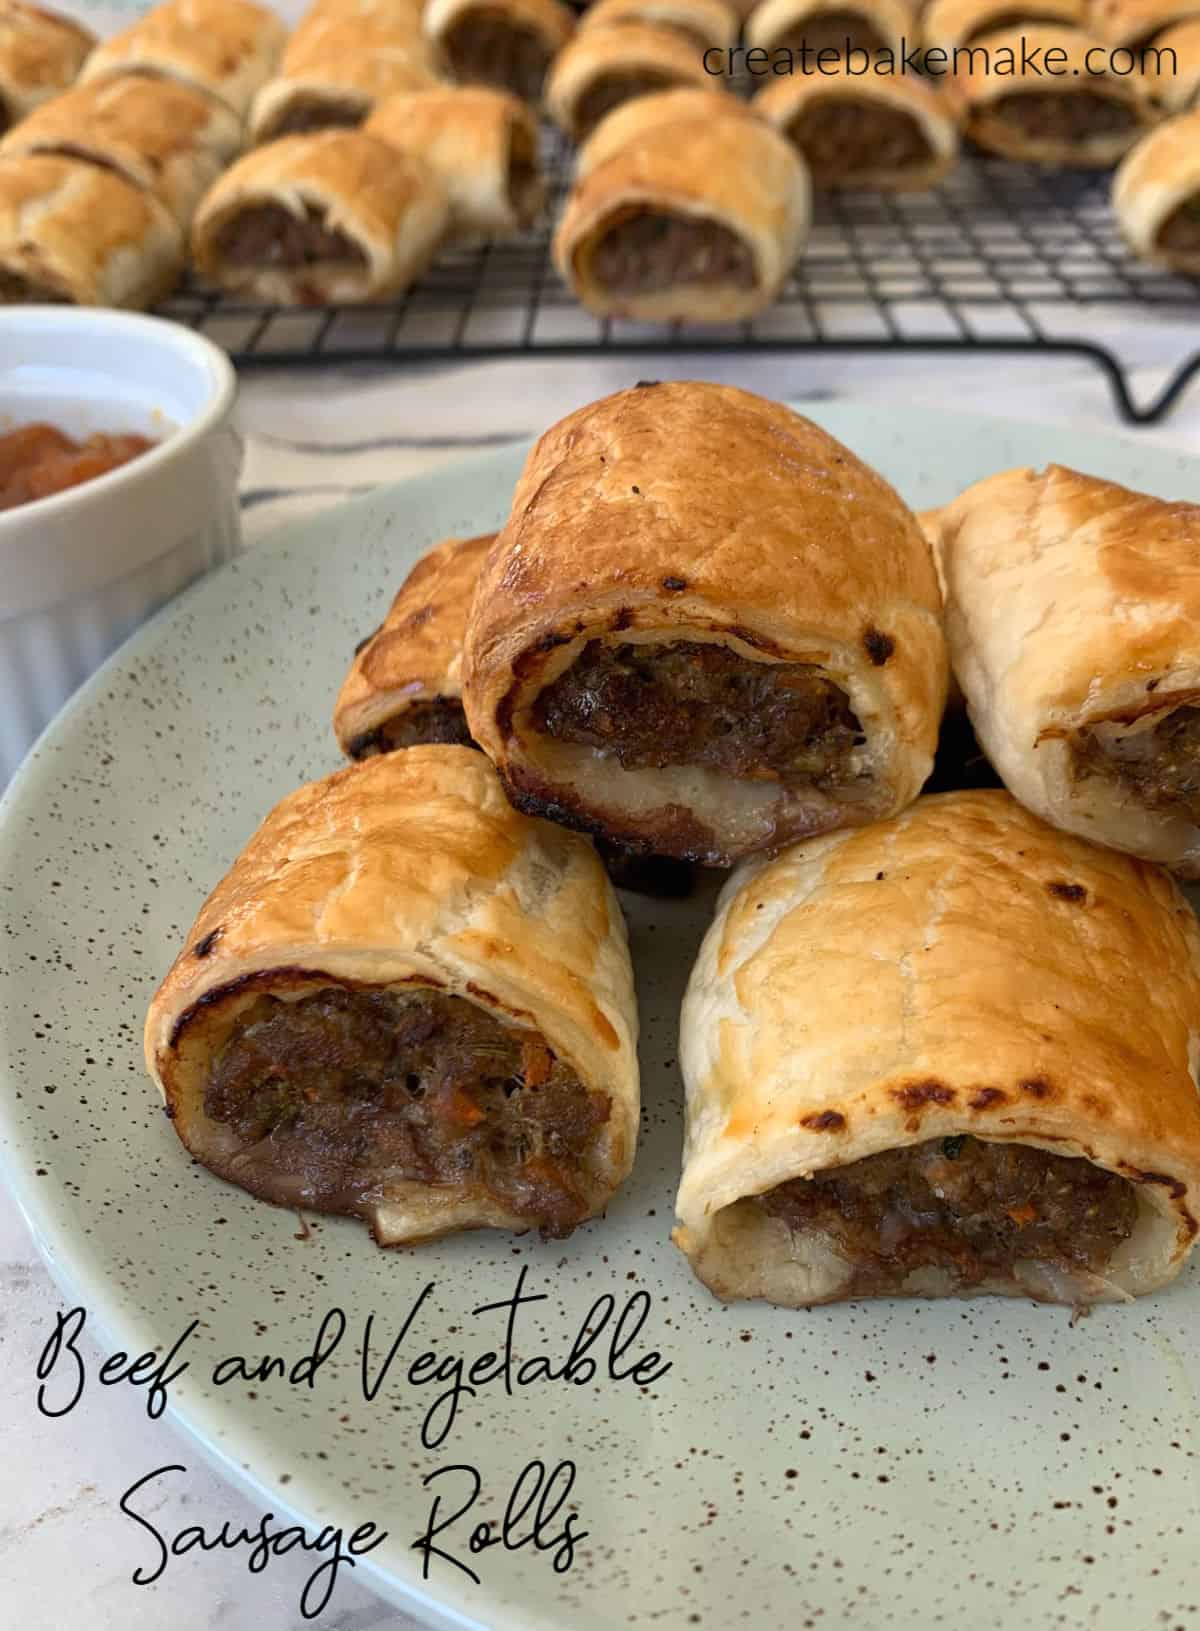 Beef and Vegetable Sausage Rolls Image